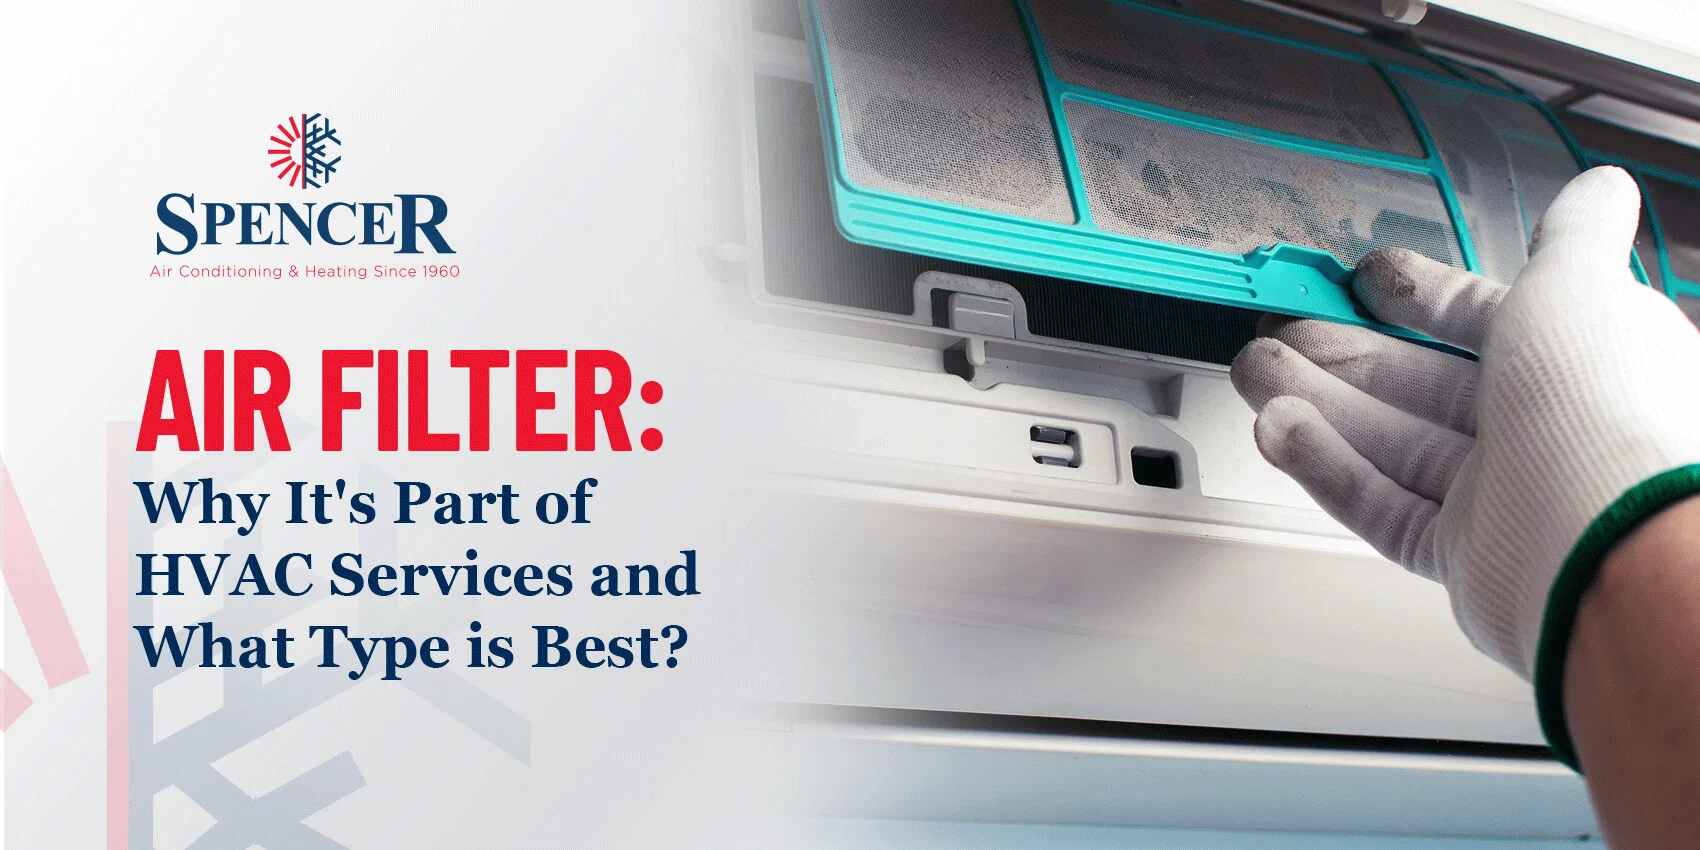 Spencer air filter: why it's part of HVAC services and what type is best? blog post title